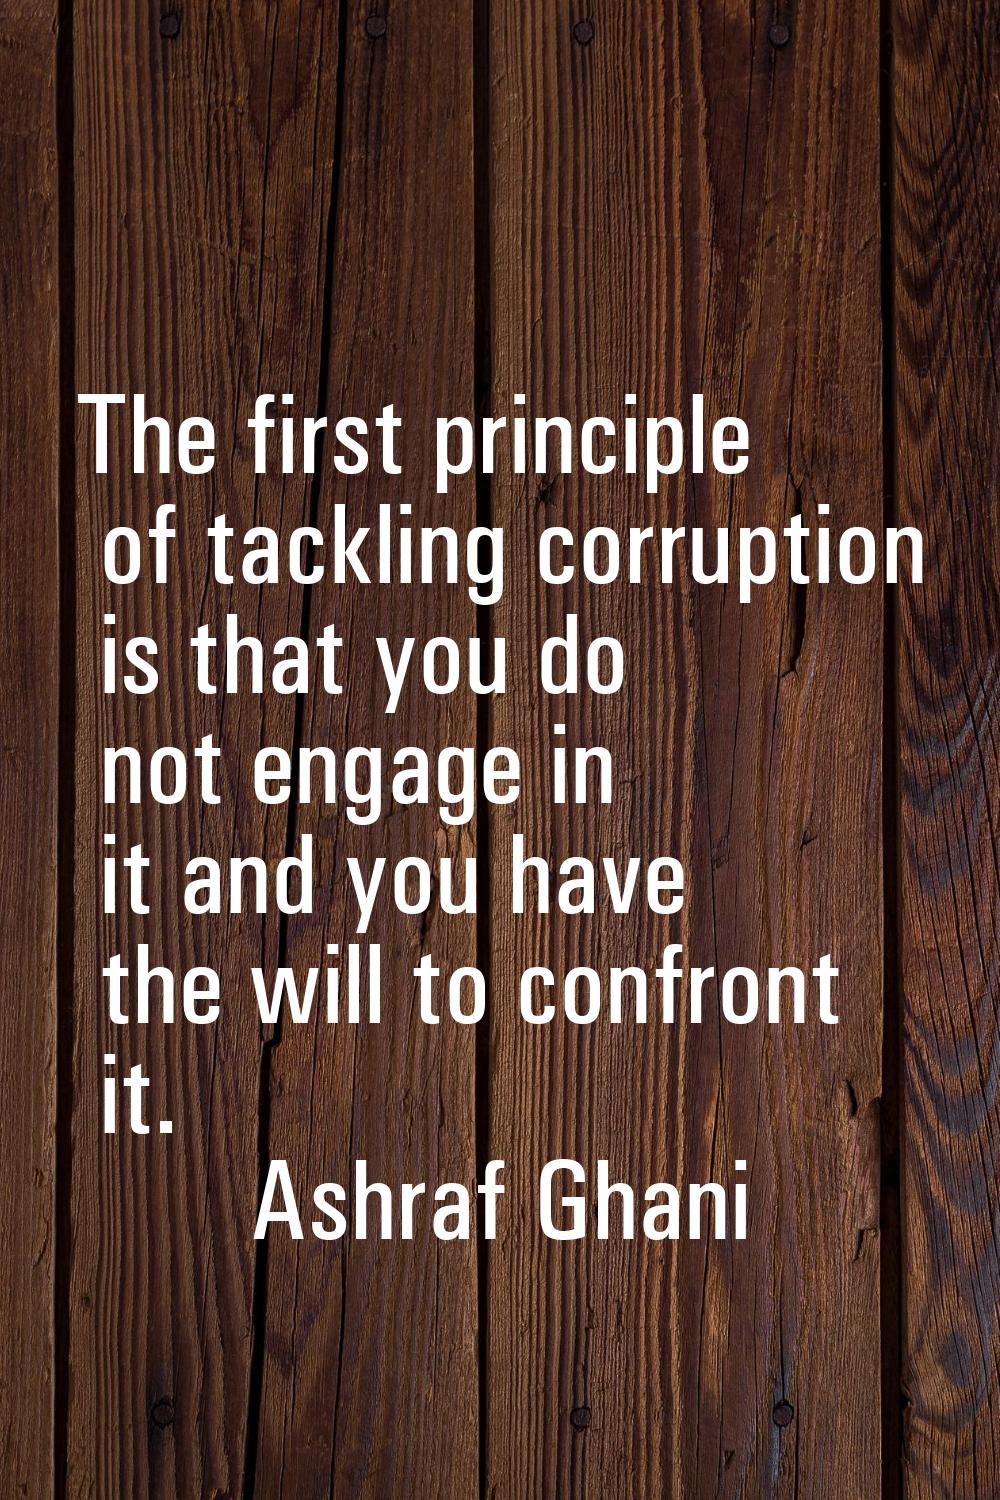 The first principle of tackling corruption is that you do not engage in it and you have the will to